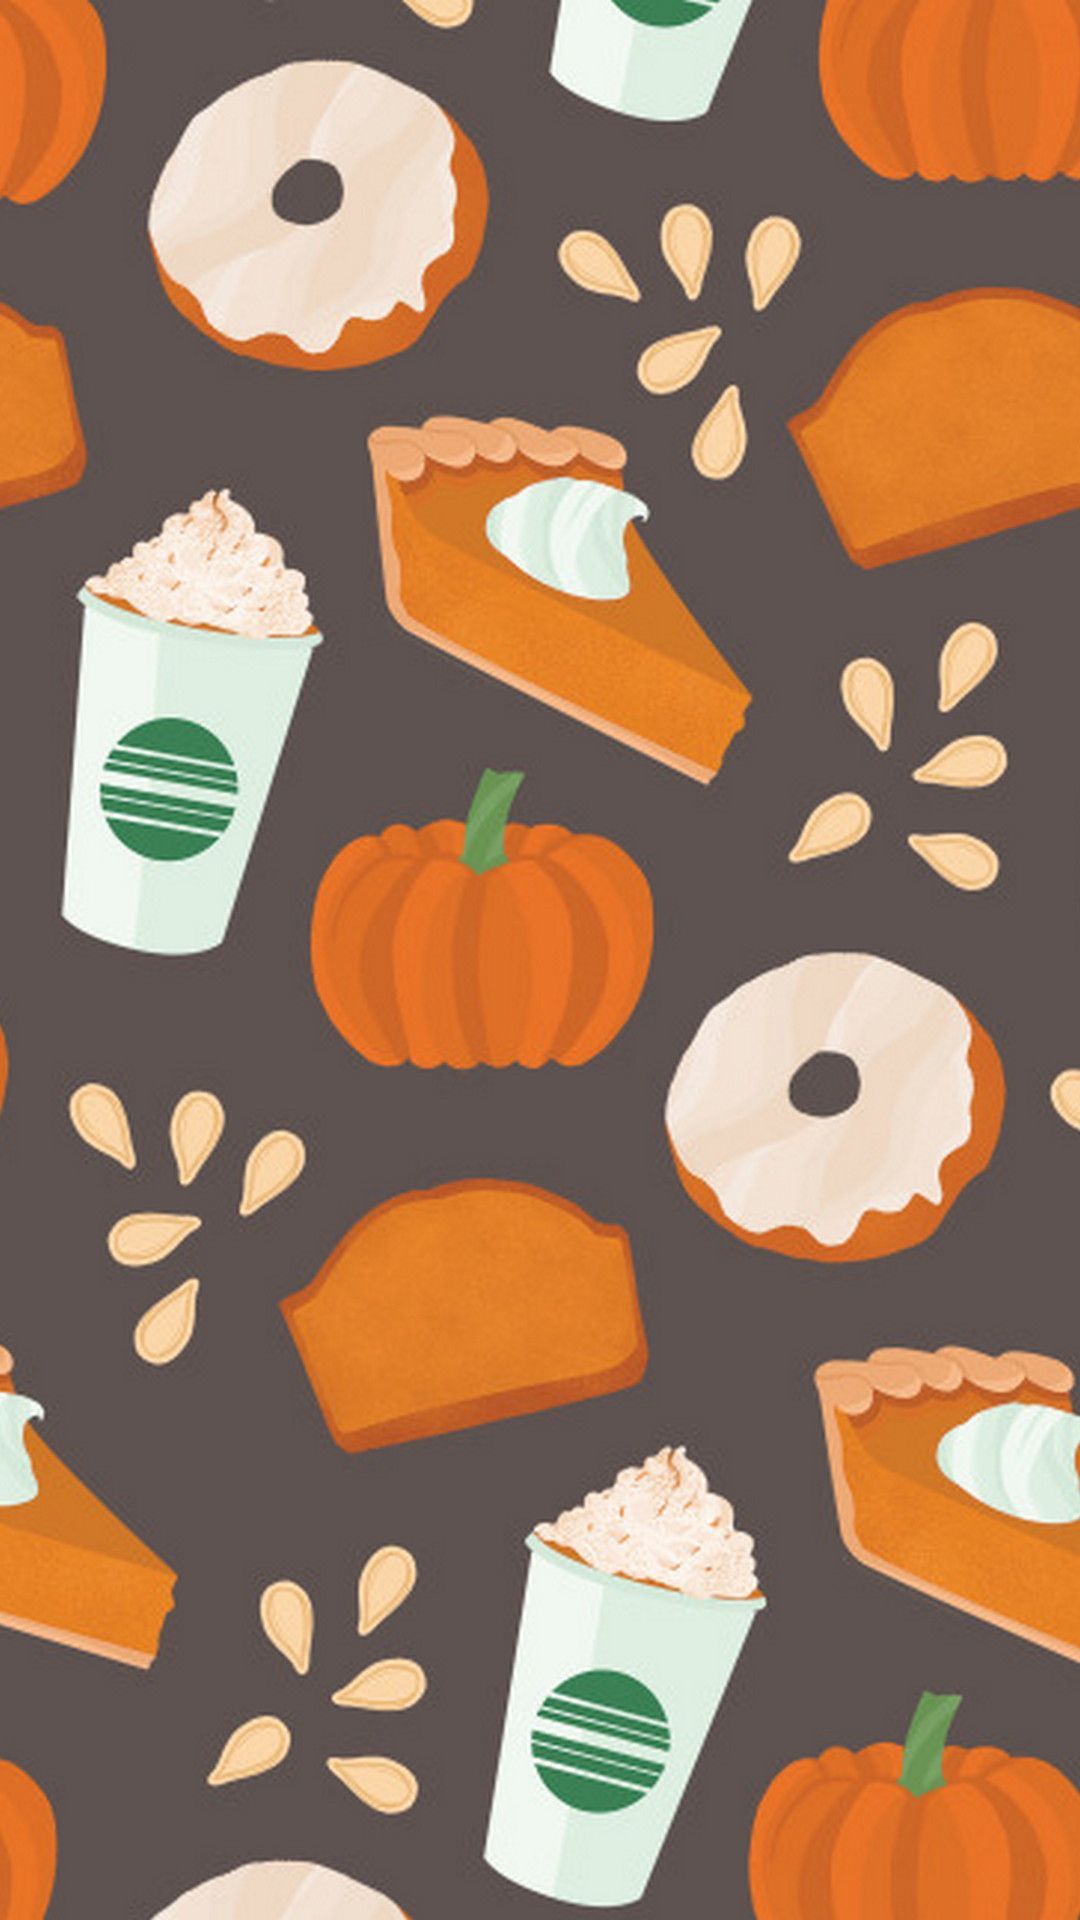 A pattern of pumpkins, donuts and coffee - Cute, candy